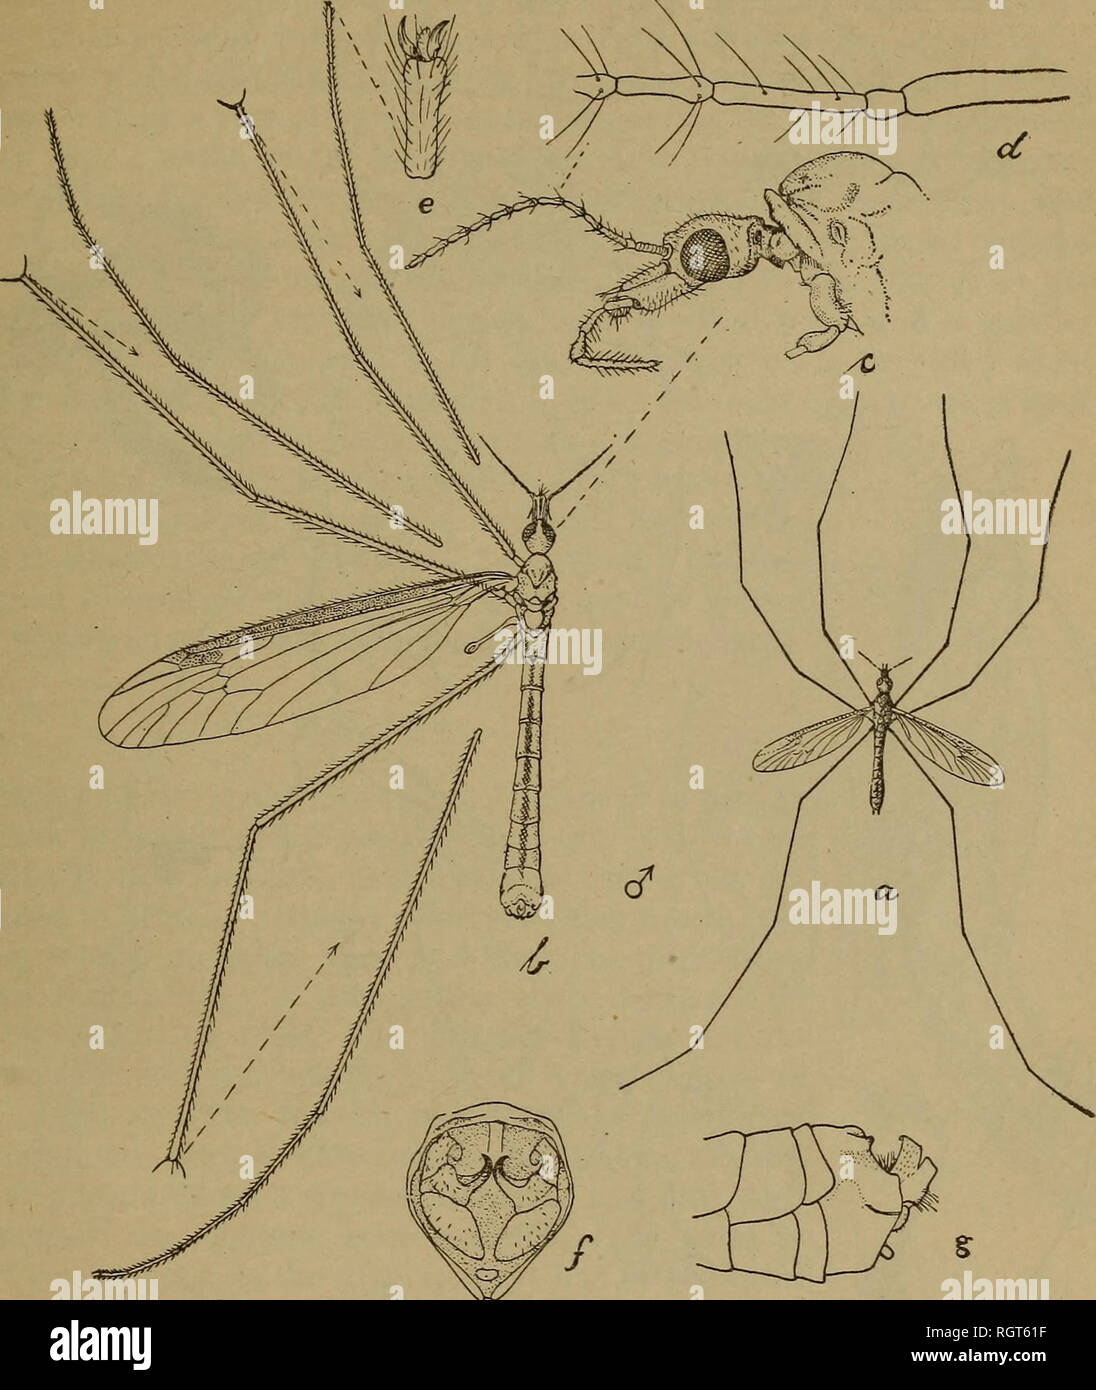 . Bulletin. Insects; Insect pests; Entomology; Insects; Insect pests; Entomology. THE SMOKY CRANE-FLY. 123 THE LARVA. Larva (fig. 63, a) filiform, 19 mm. in length and 3 mm. in diameter at its widest point when fully extended. General color dirty yellowish brown, dark-. Fig. 61.—The smoky crane-fly: a, b, Adult male; c, thorax and head, lateral aspect; d, antennal joints I-IV; e, tarsal joint and ungues; f, pygidial segments, terminal aspect; g, end of abdomen, lateral aspect, a, natural size ; b, enlarged ; c-g, much enlarged. (Original.) ening to almost black at the extremities. Body compose Stock Photo